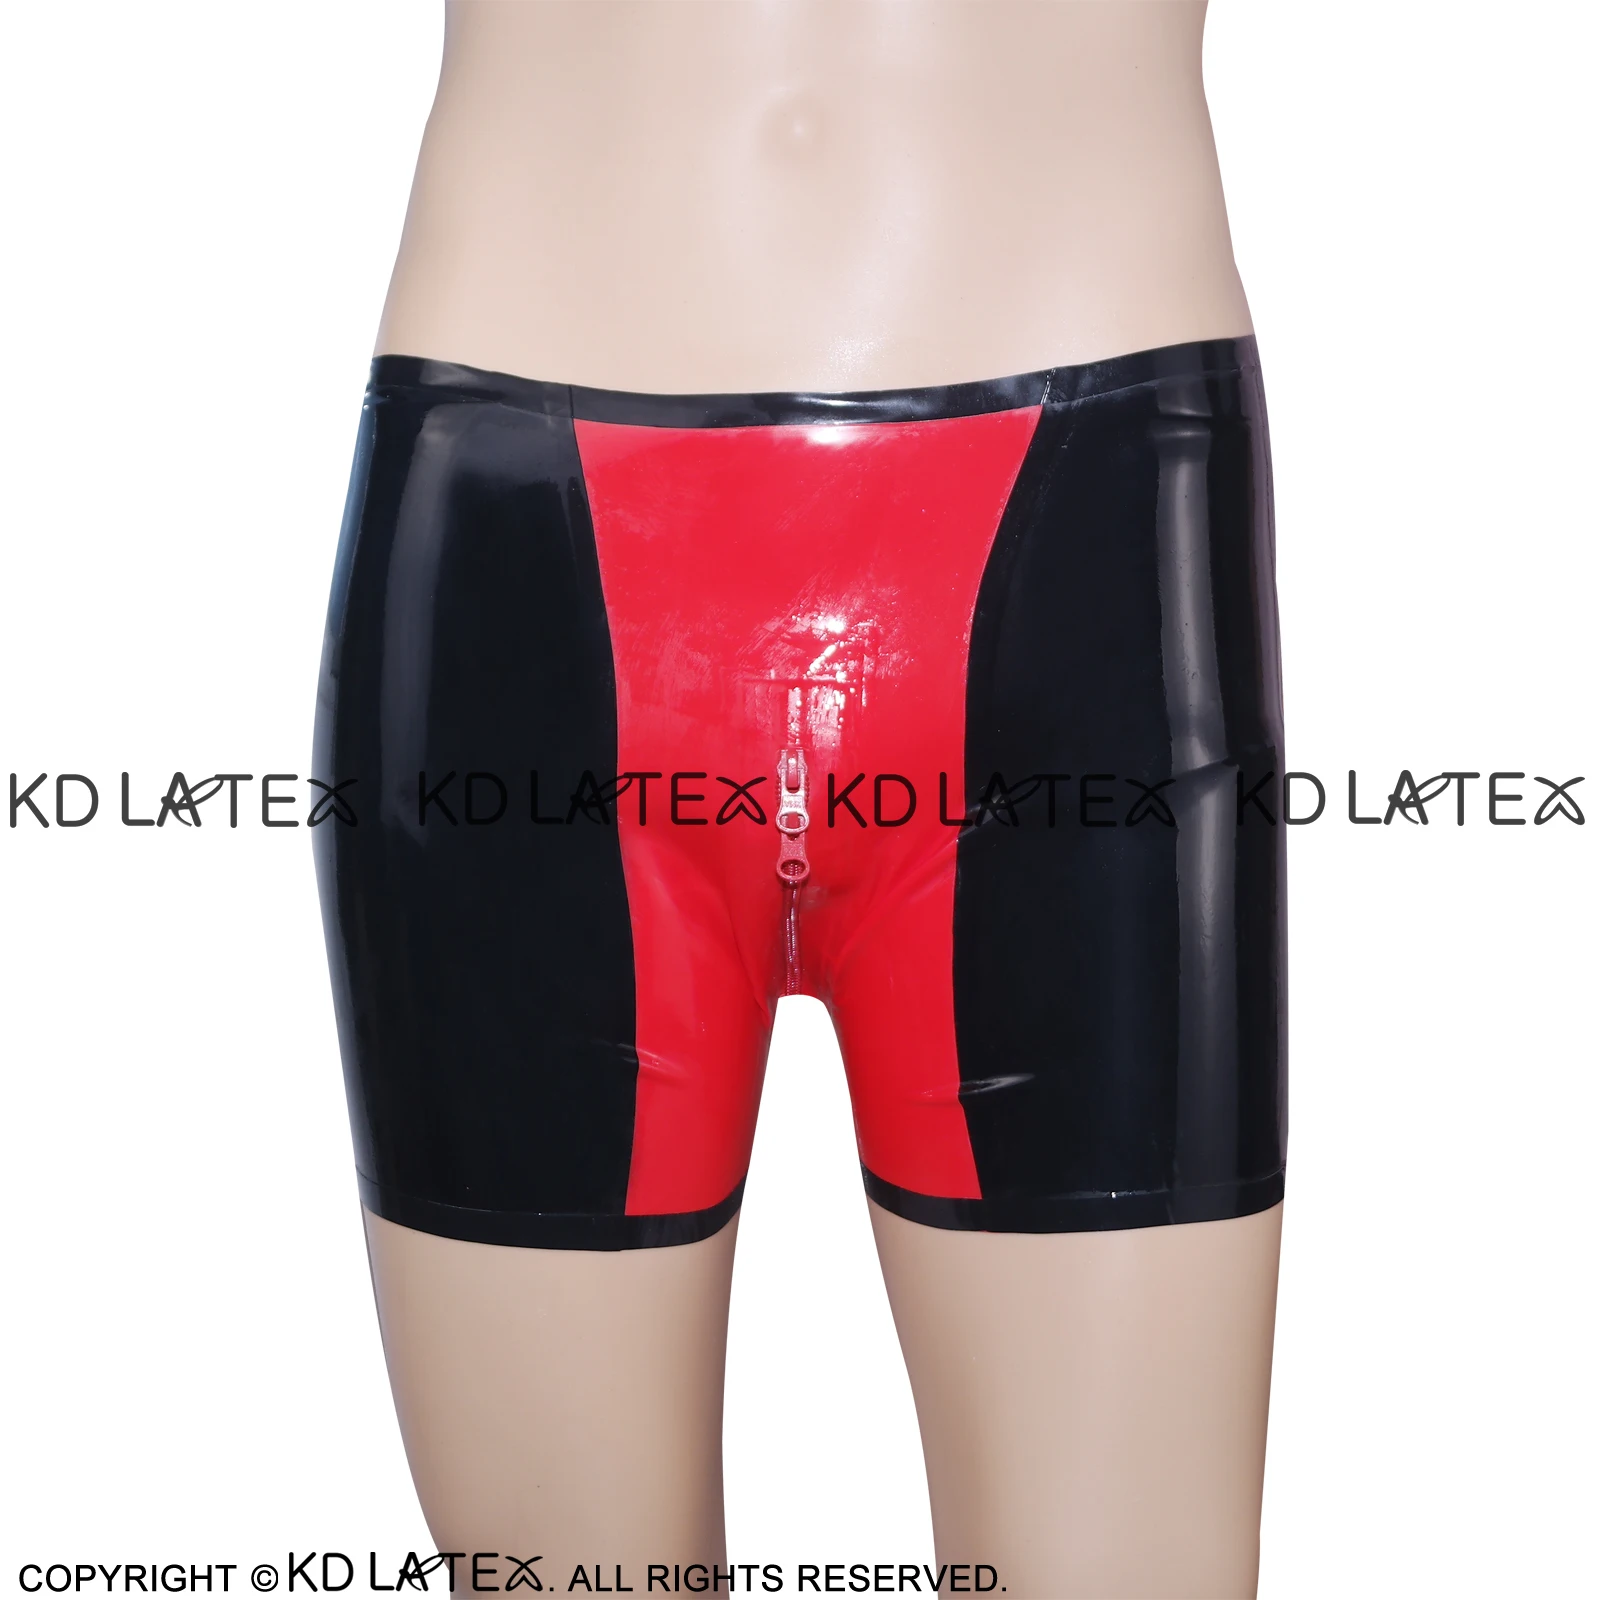 Latex Briefs With Stripes Holes Rubber Panties Shorts Boyshorts Underpants  Underwear Pants,brown With White,XXL